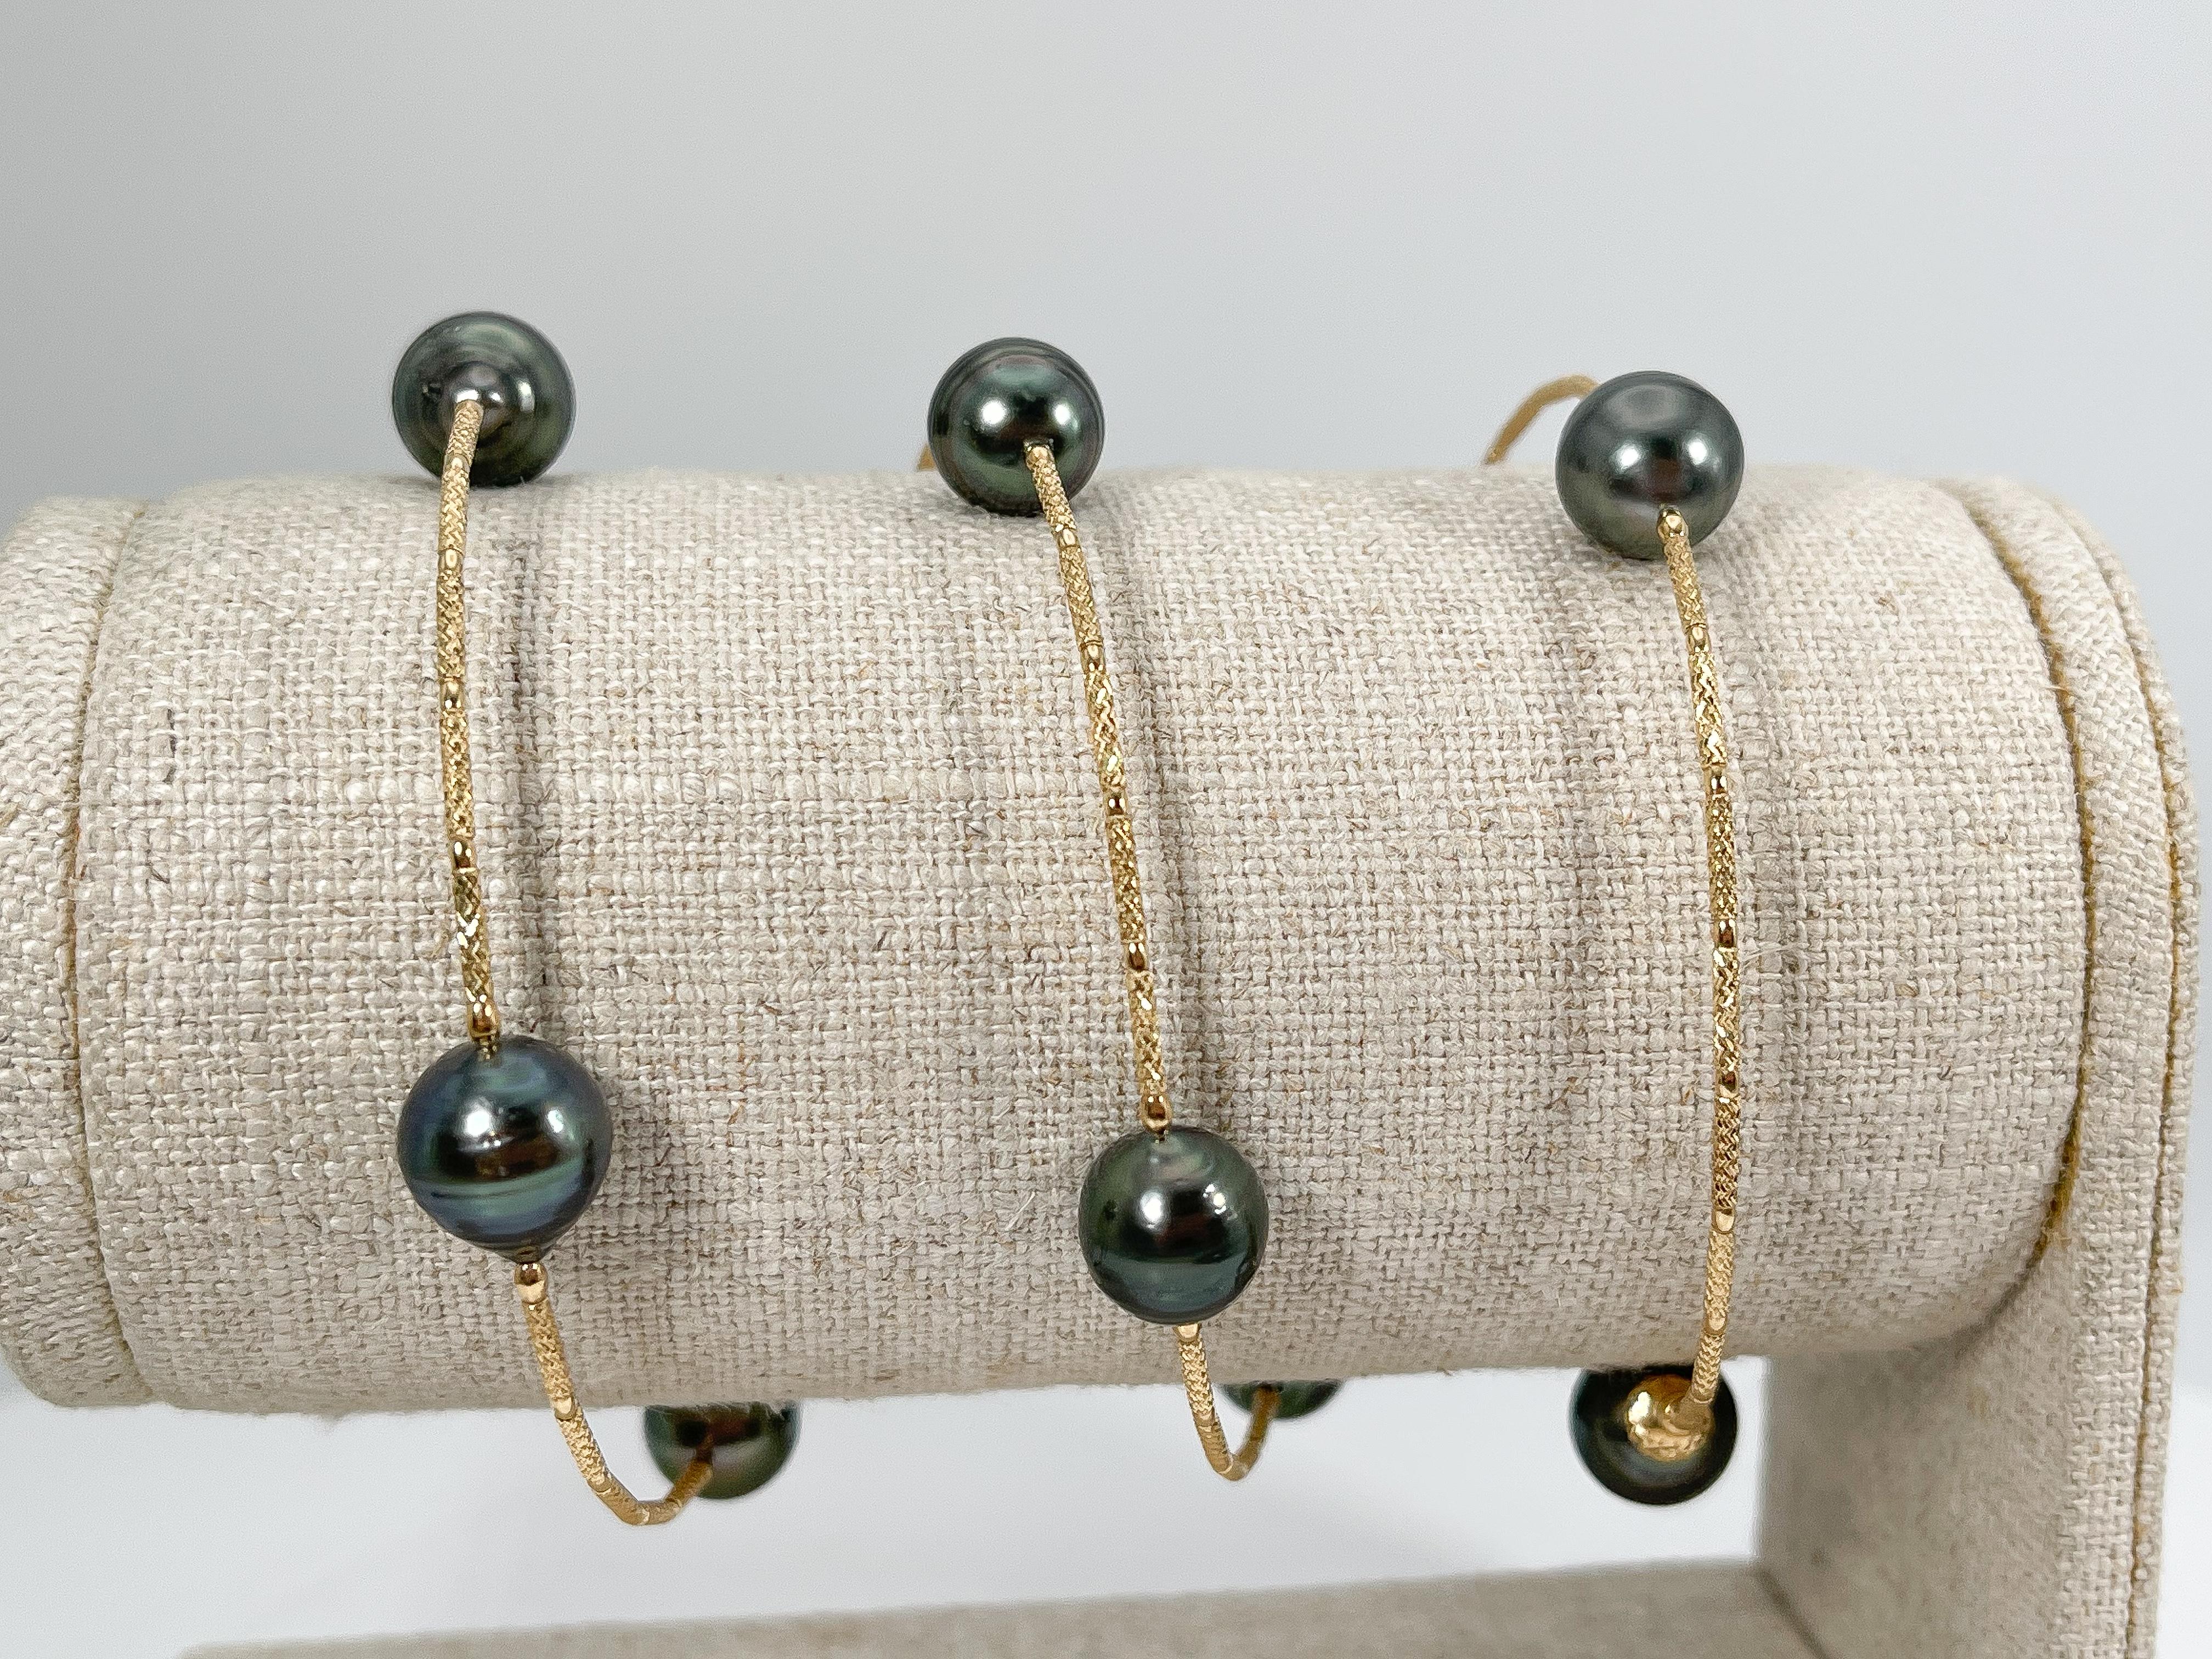 18k yellow gold wire cable black pearl bracelet. This bracelet stretches to fit almost any wrist, the width of the pearls are 9-9 1/2 mm, and it has a total weight of 18 grams.